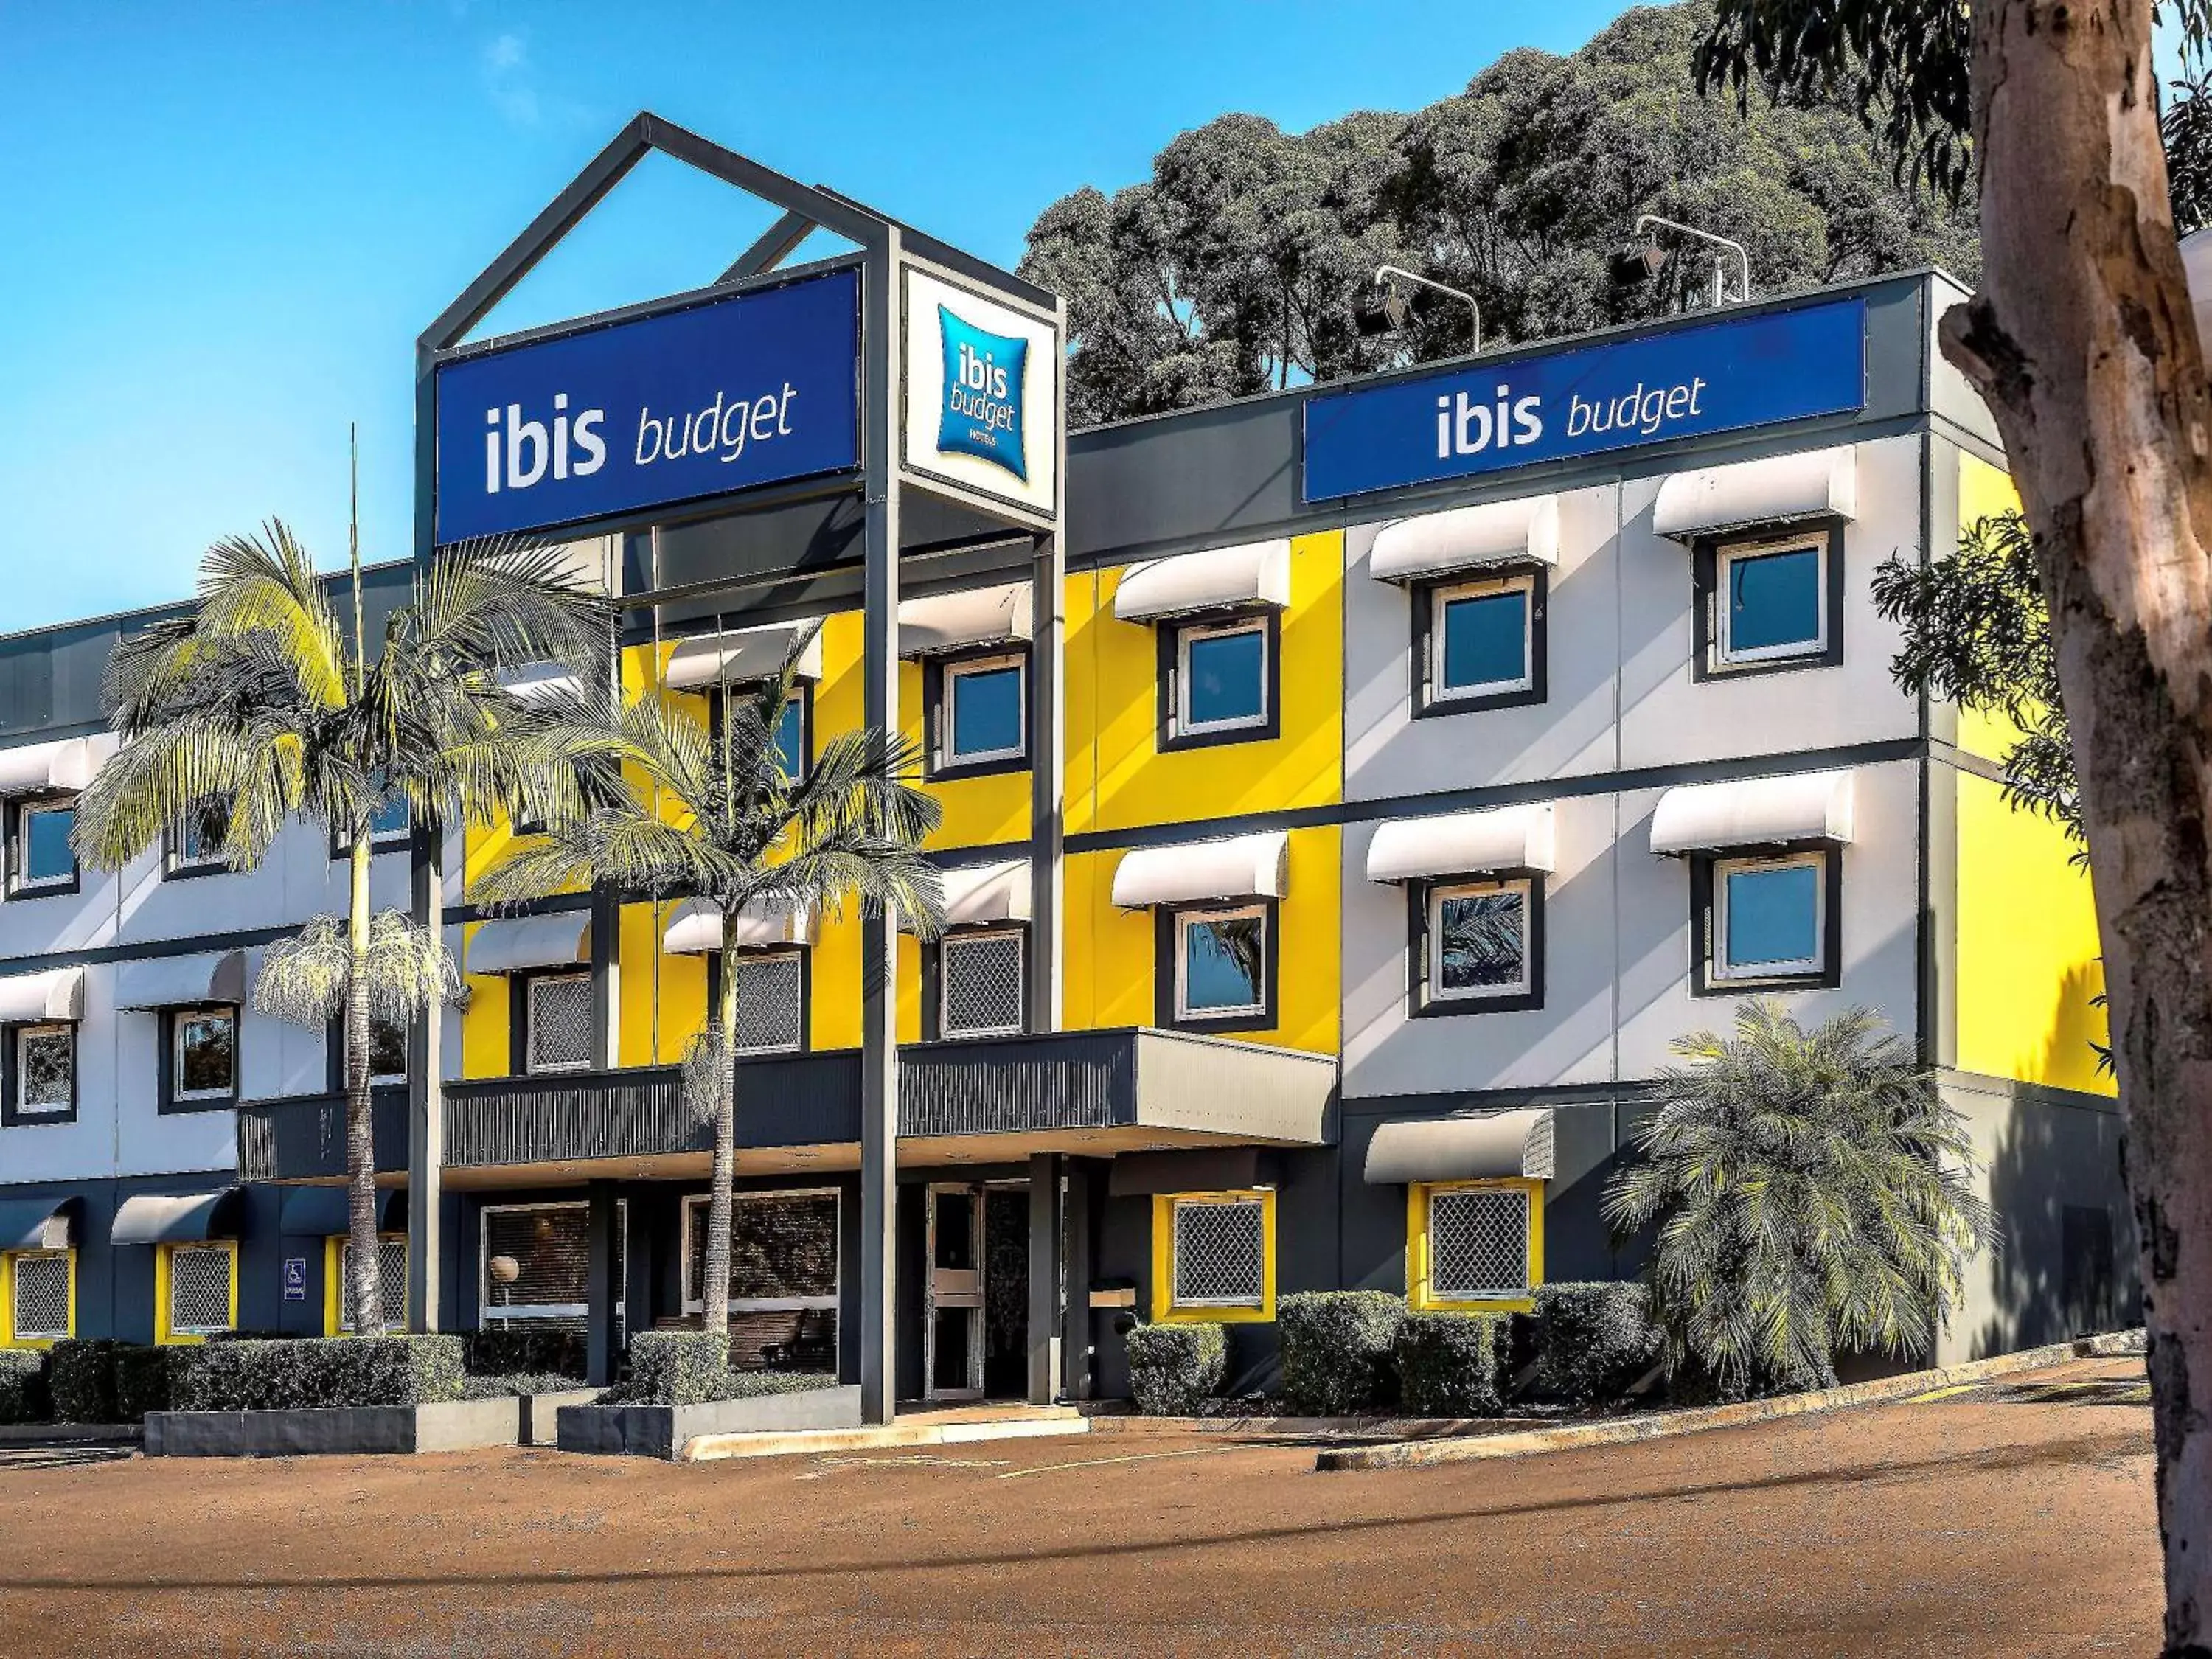 Property Building in ibis Budget - Enfield